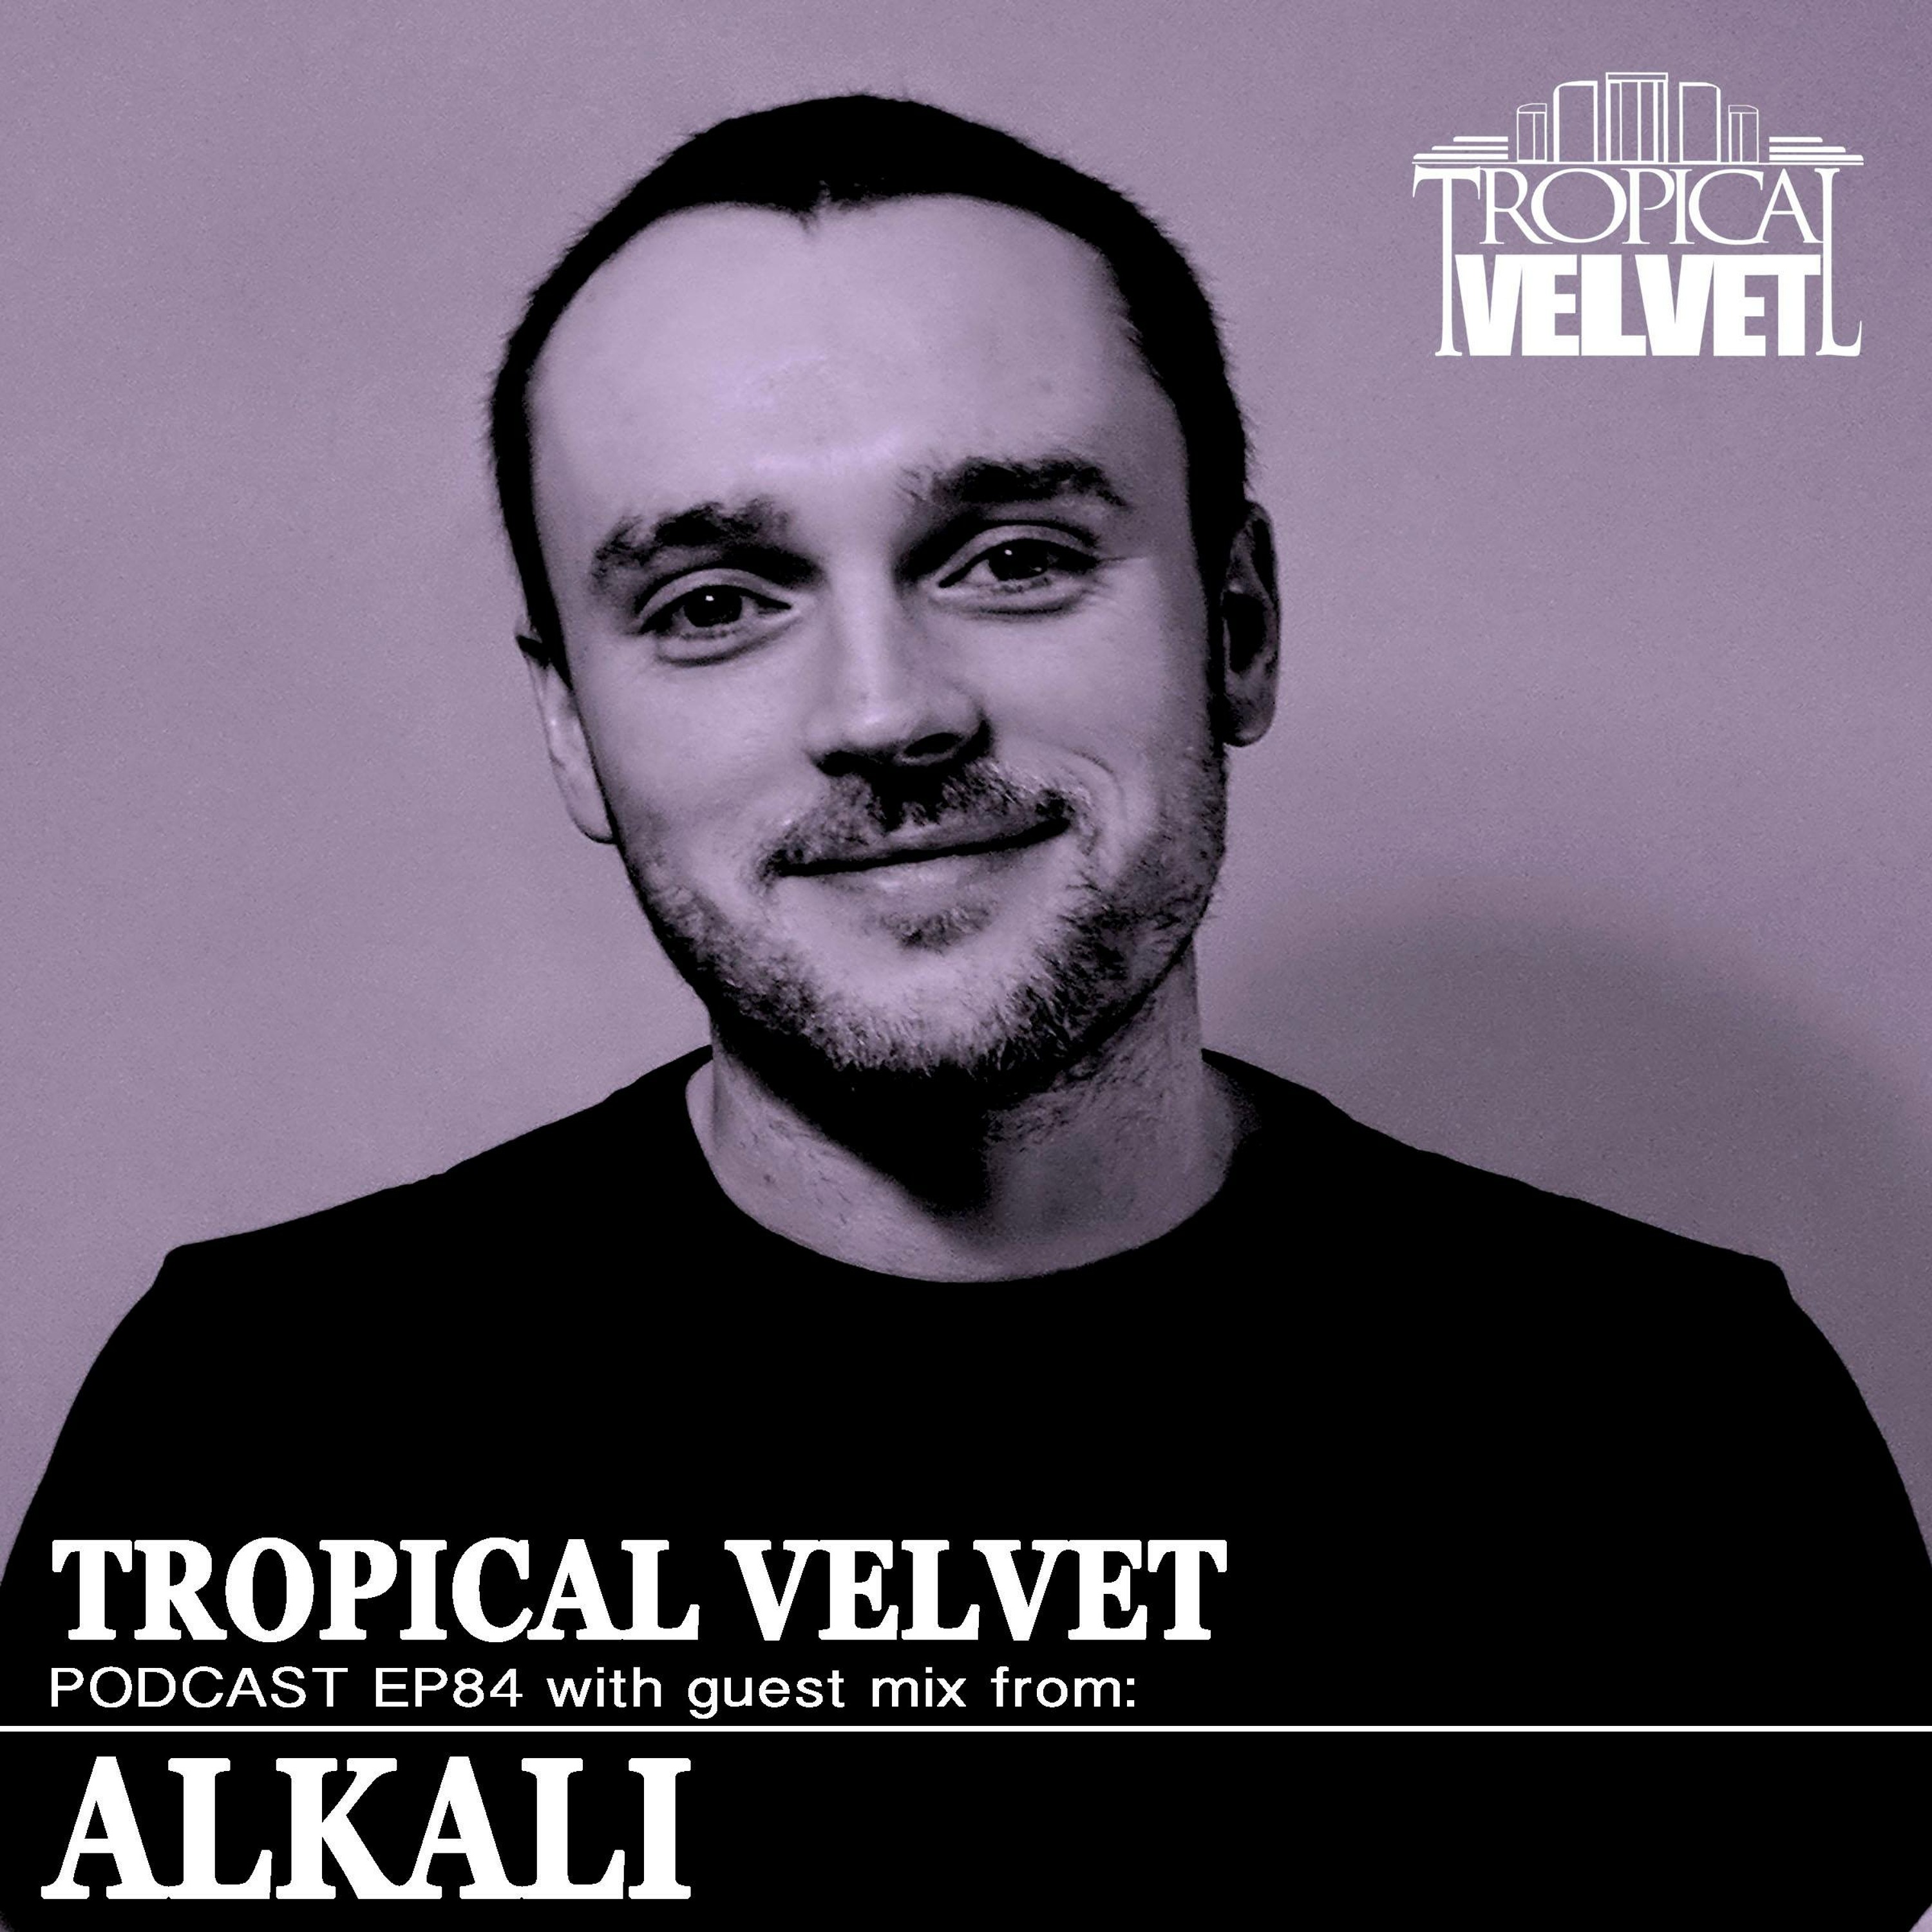 TROPICAL VELVET PODCAST EP84 MIXED BY KORT GUEST MIX ALKALI